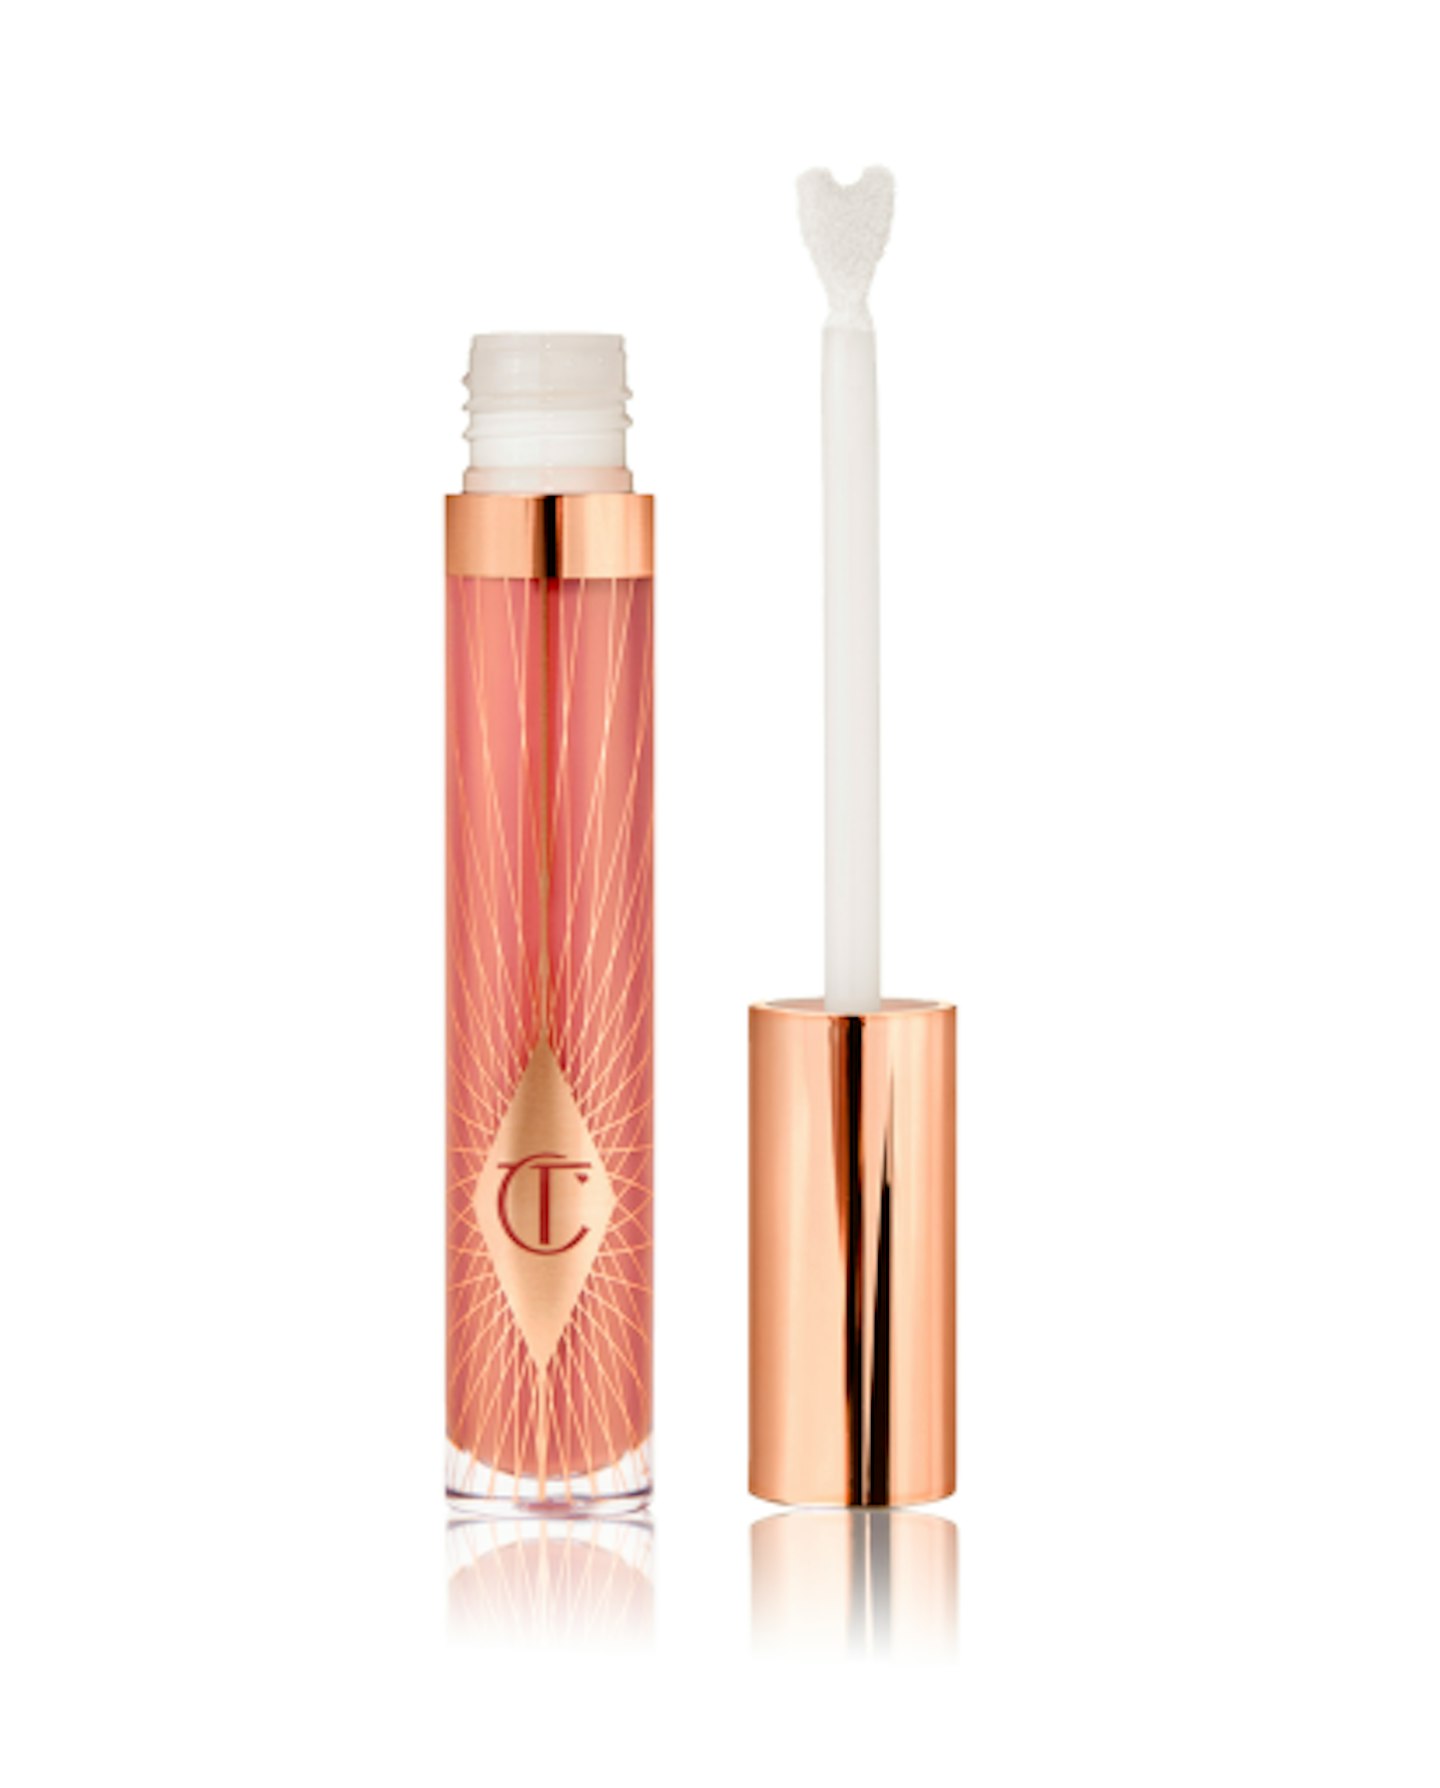 Charlotte Tilbury's New Pillow Talk Range Is On Sale Right Now 